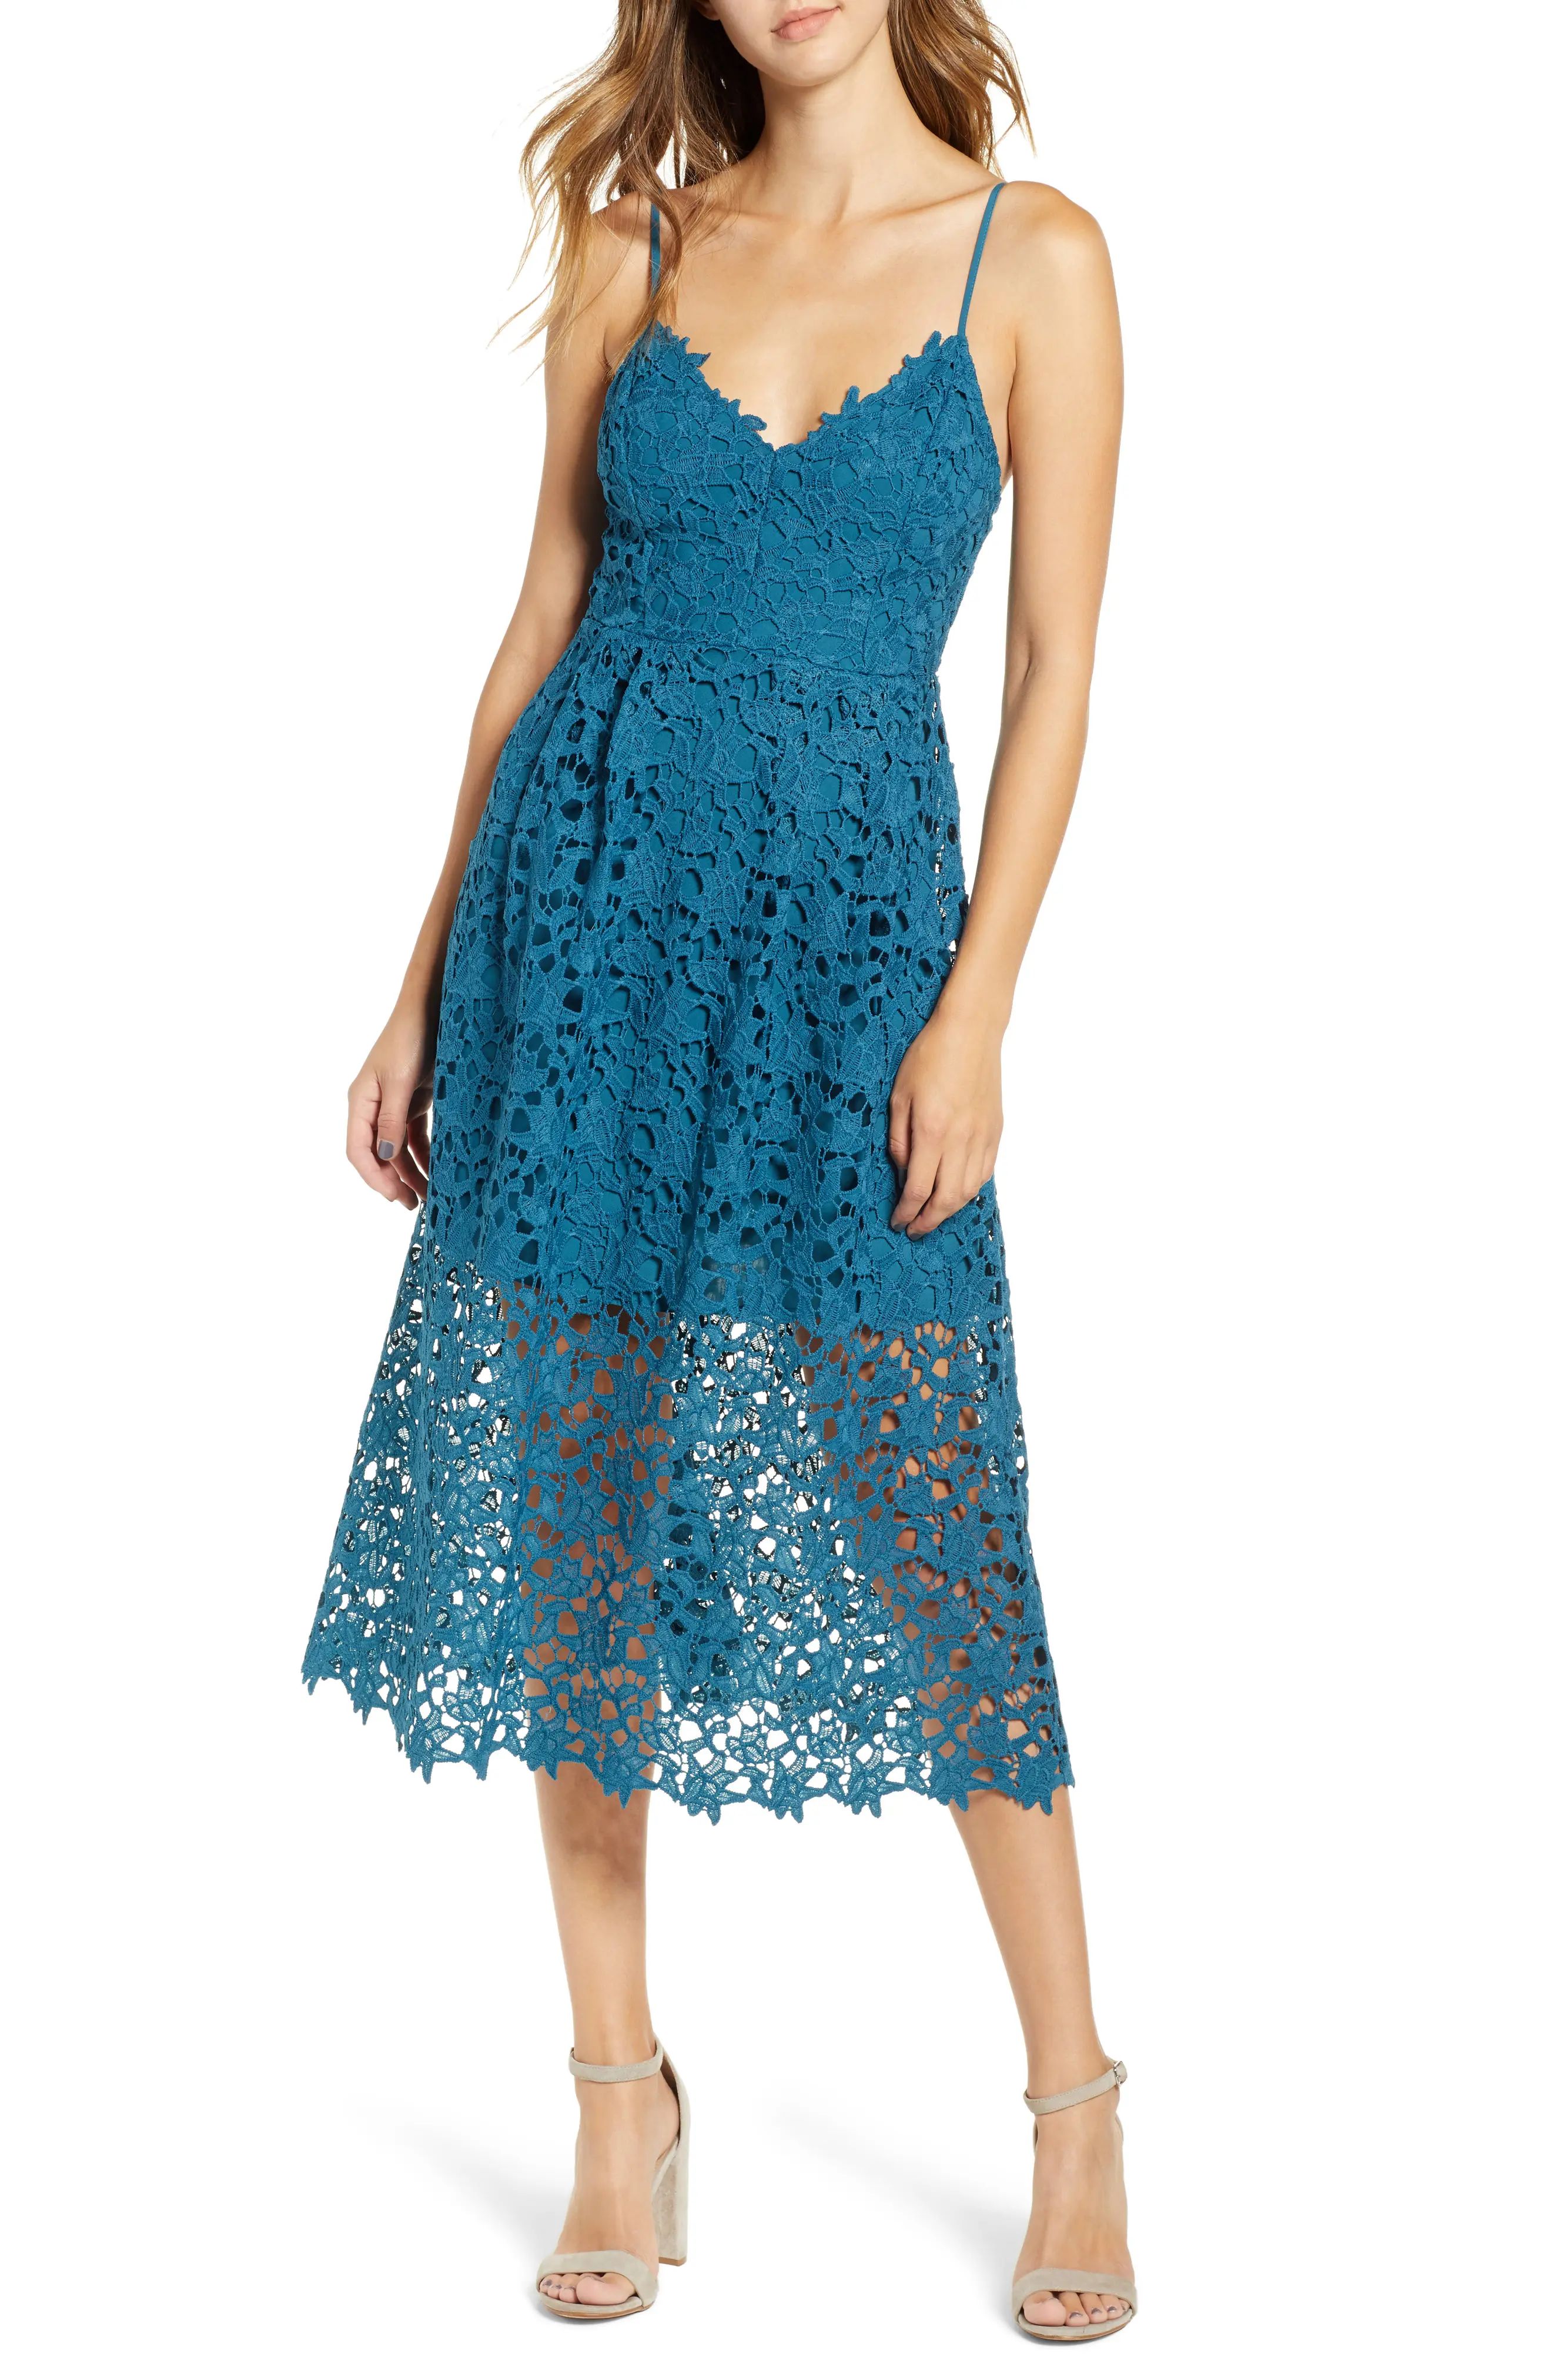 Women's Astr The Label Lace Midi Dress, Size X-Small - Blue/green | Nordstrom